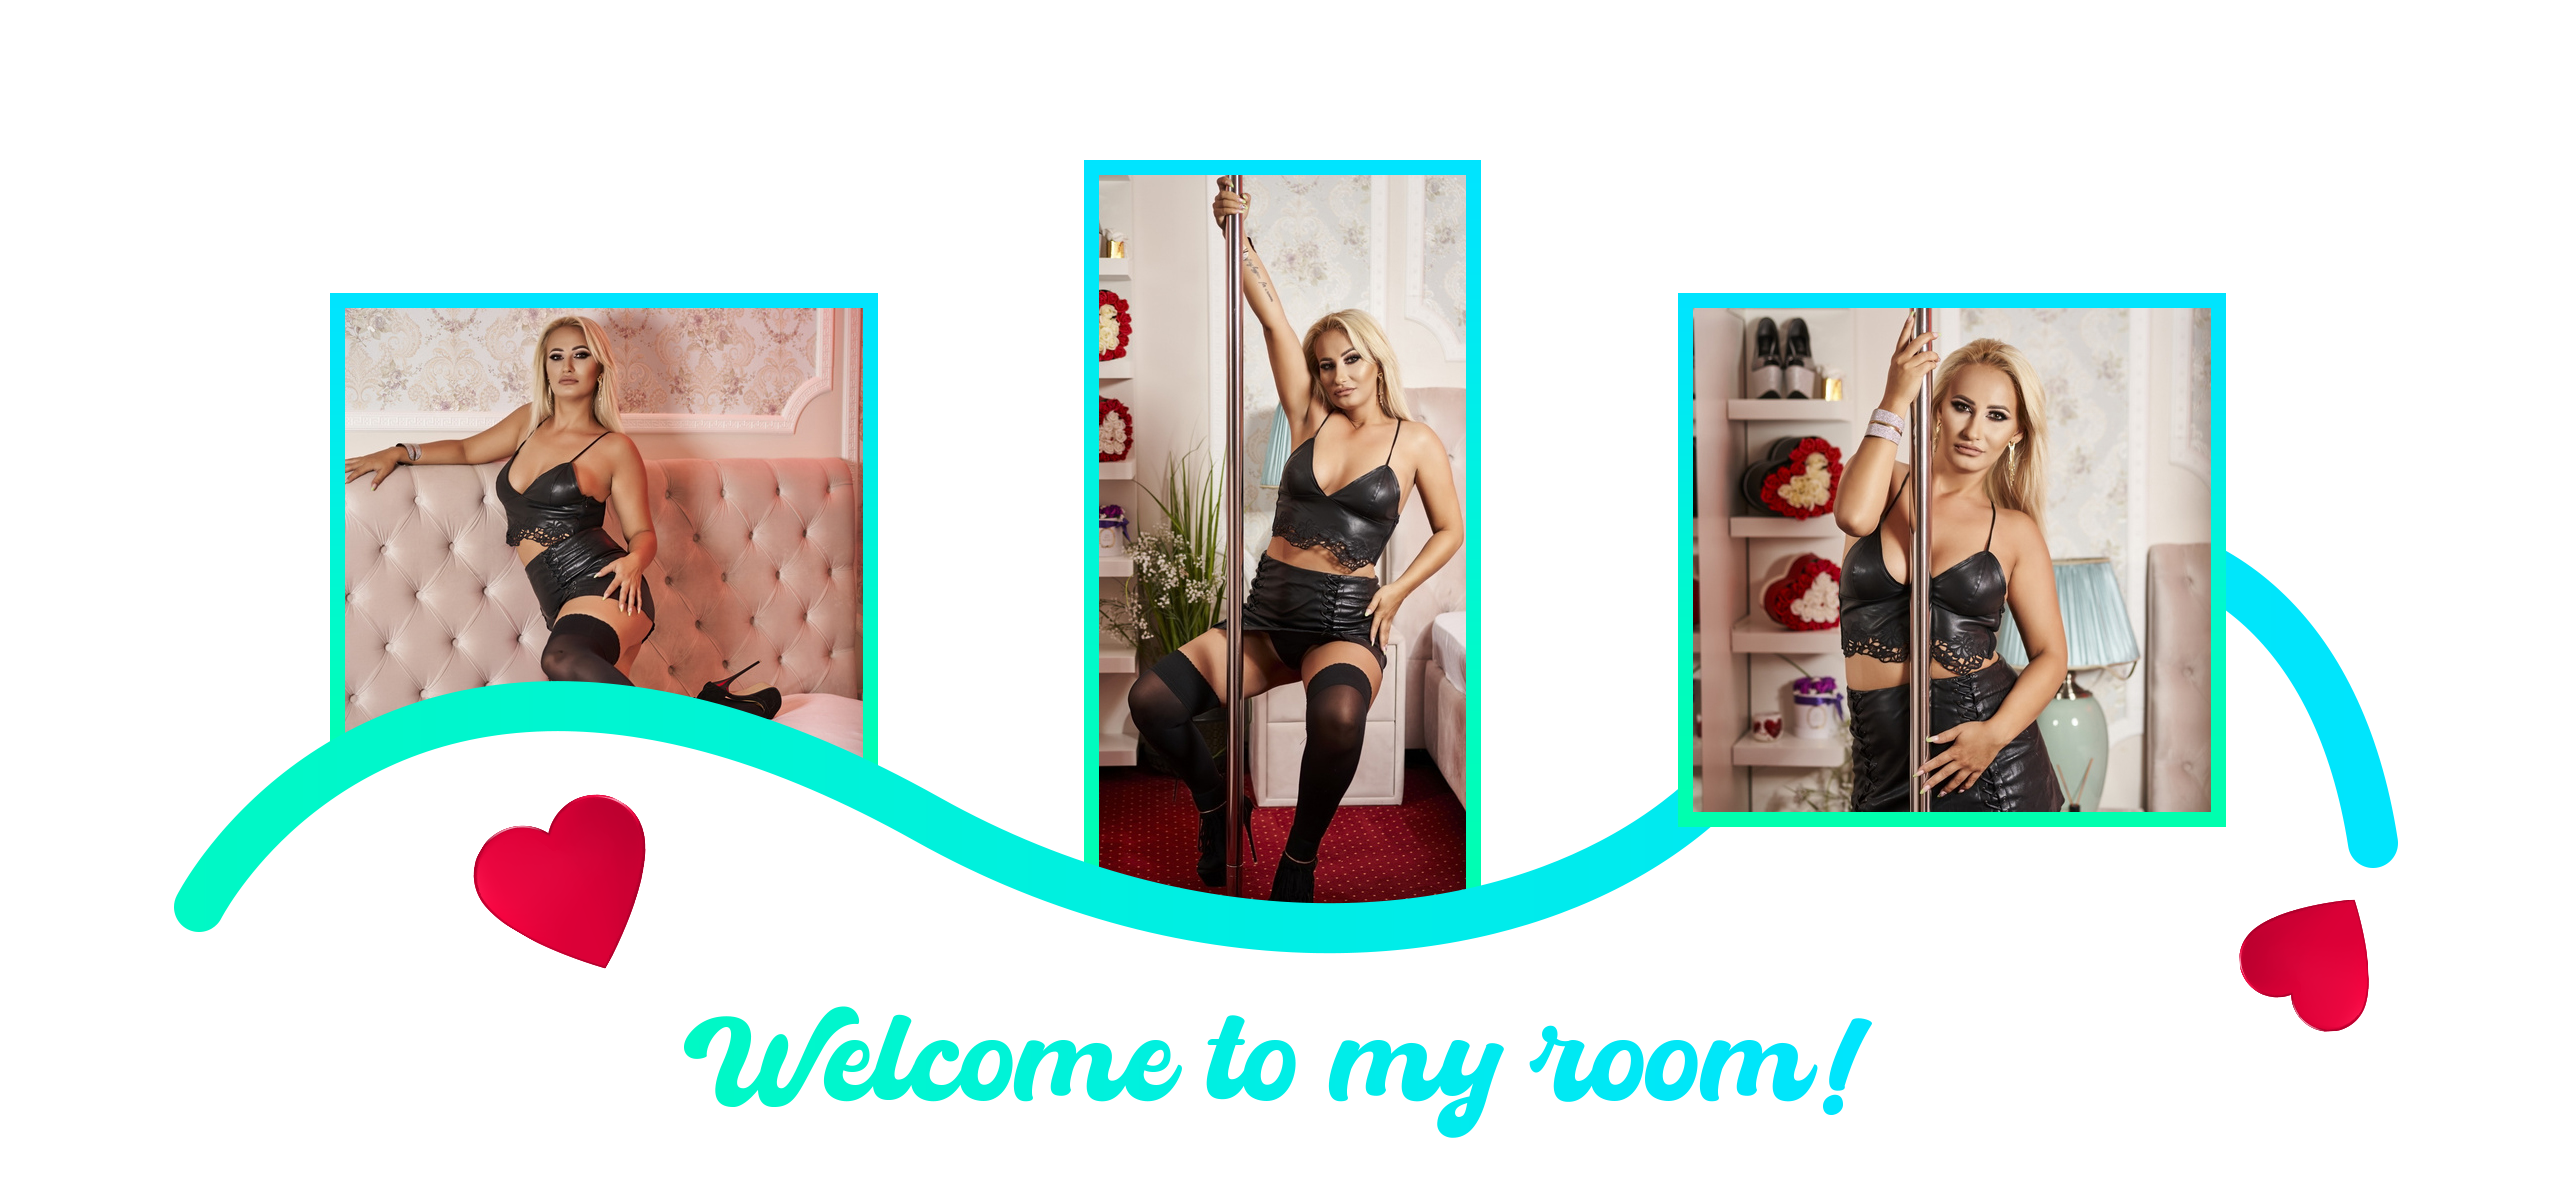 AbbyRusso Hey guys, welcome to my room, let's have some fun! image: 9